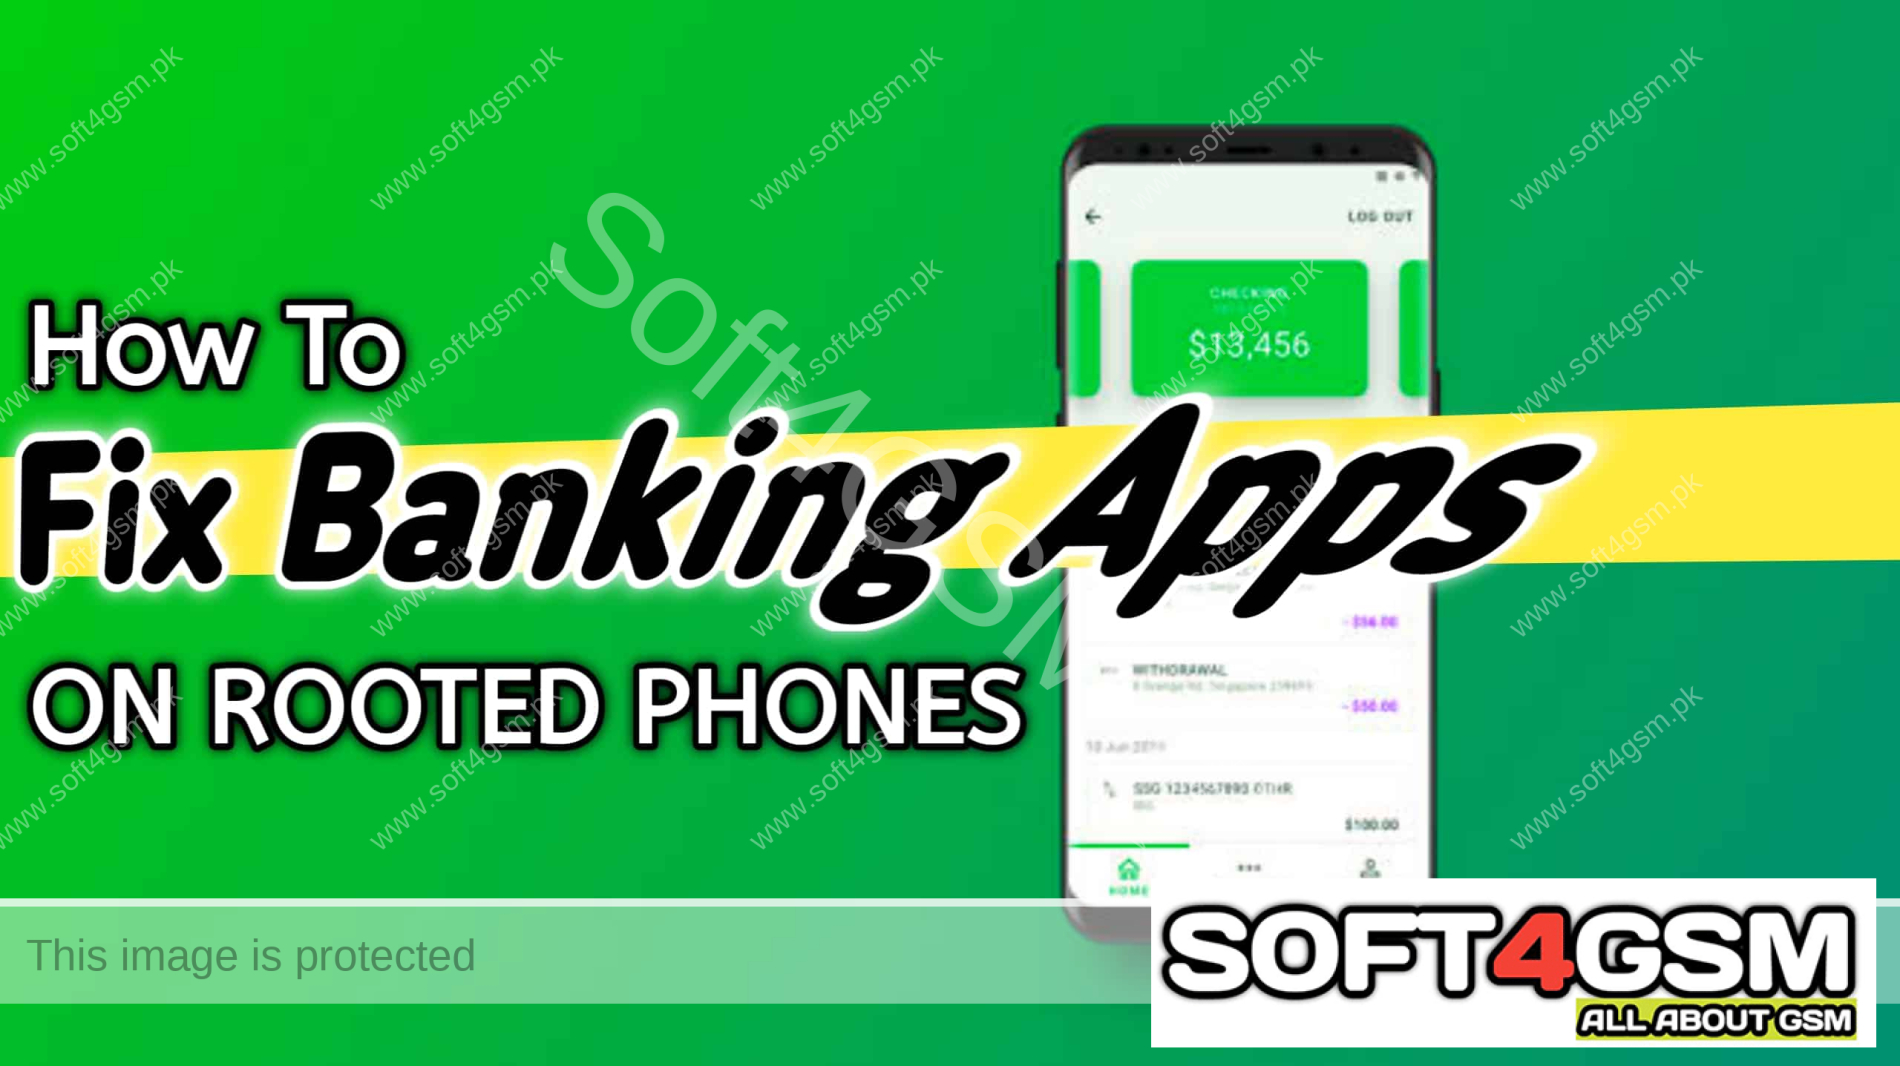 Banking Apps On Rooted Phones